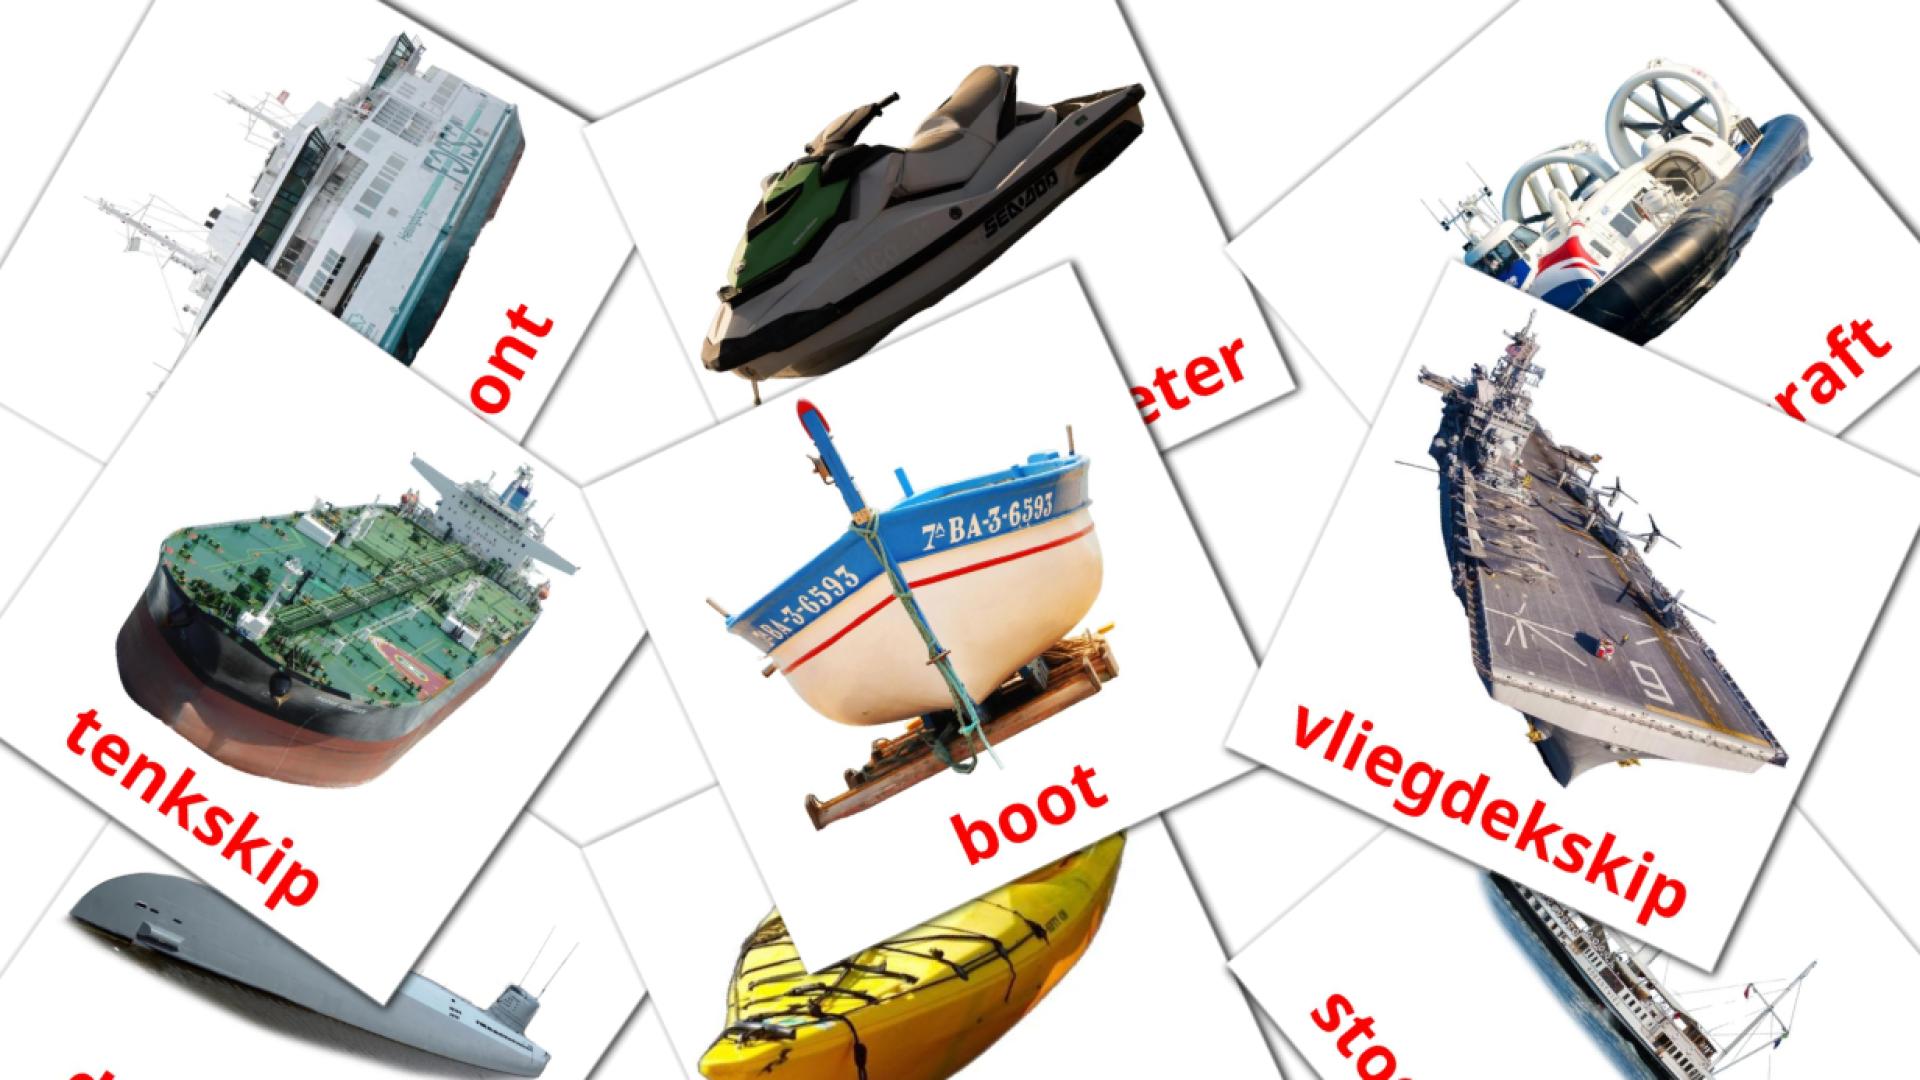 Water transport - afrikaans vocabulary cards